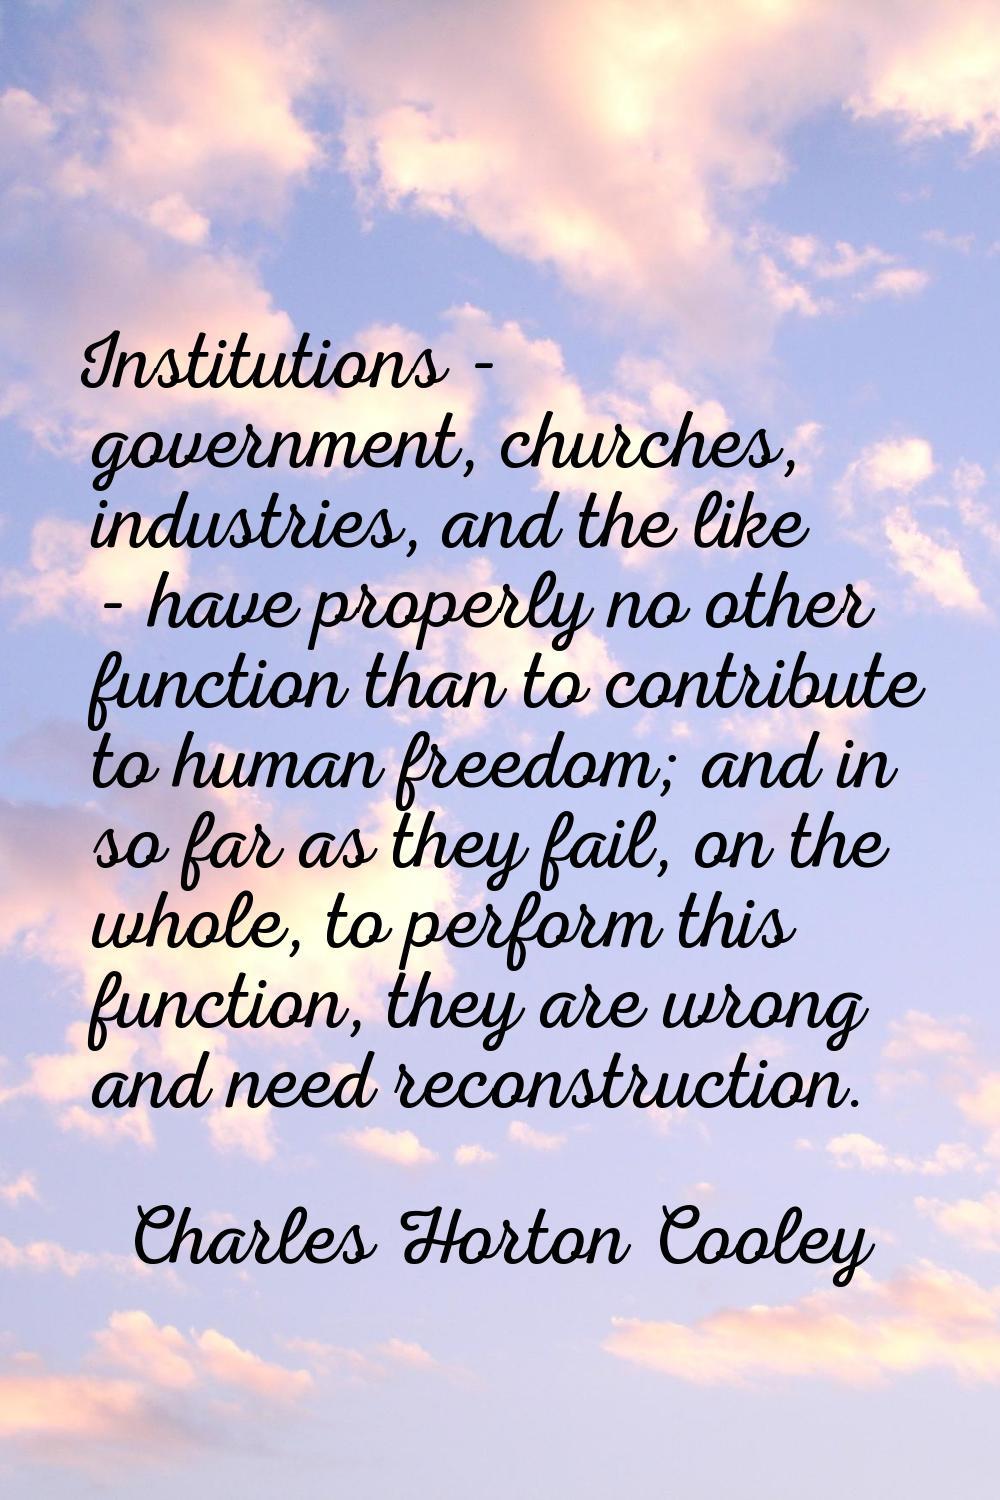 Institutions - government, churches, industries, and the like - have properly no other function tha